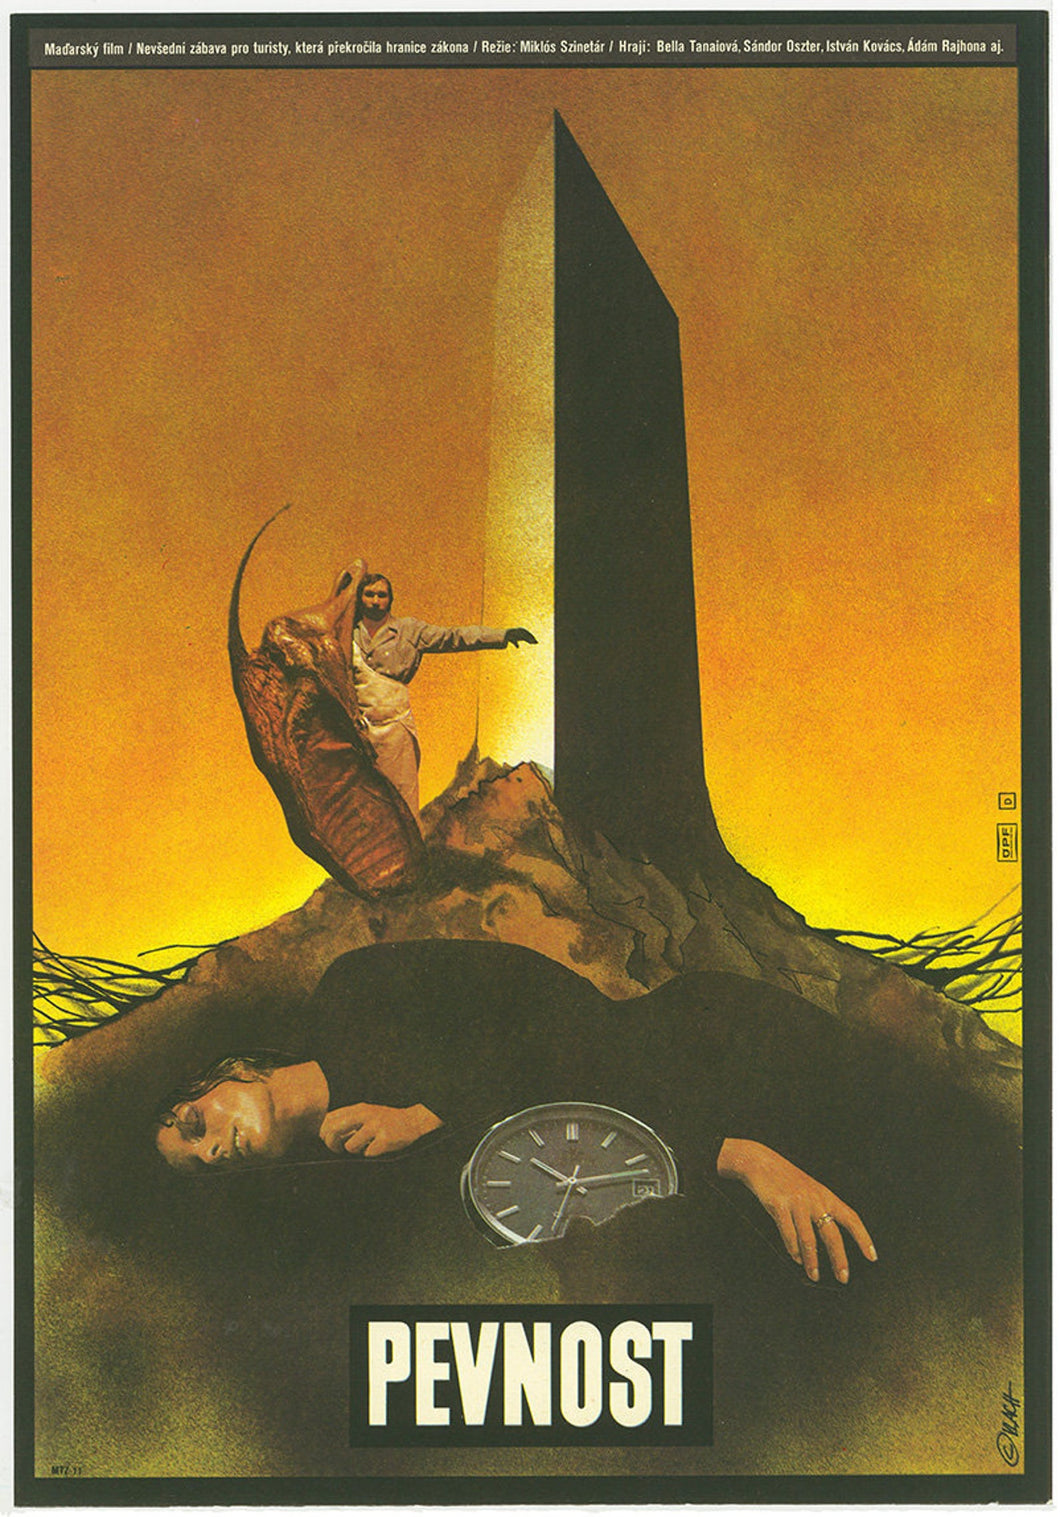 Surreal Film Poster from Czechoslovakia for Hungarian Movie 